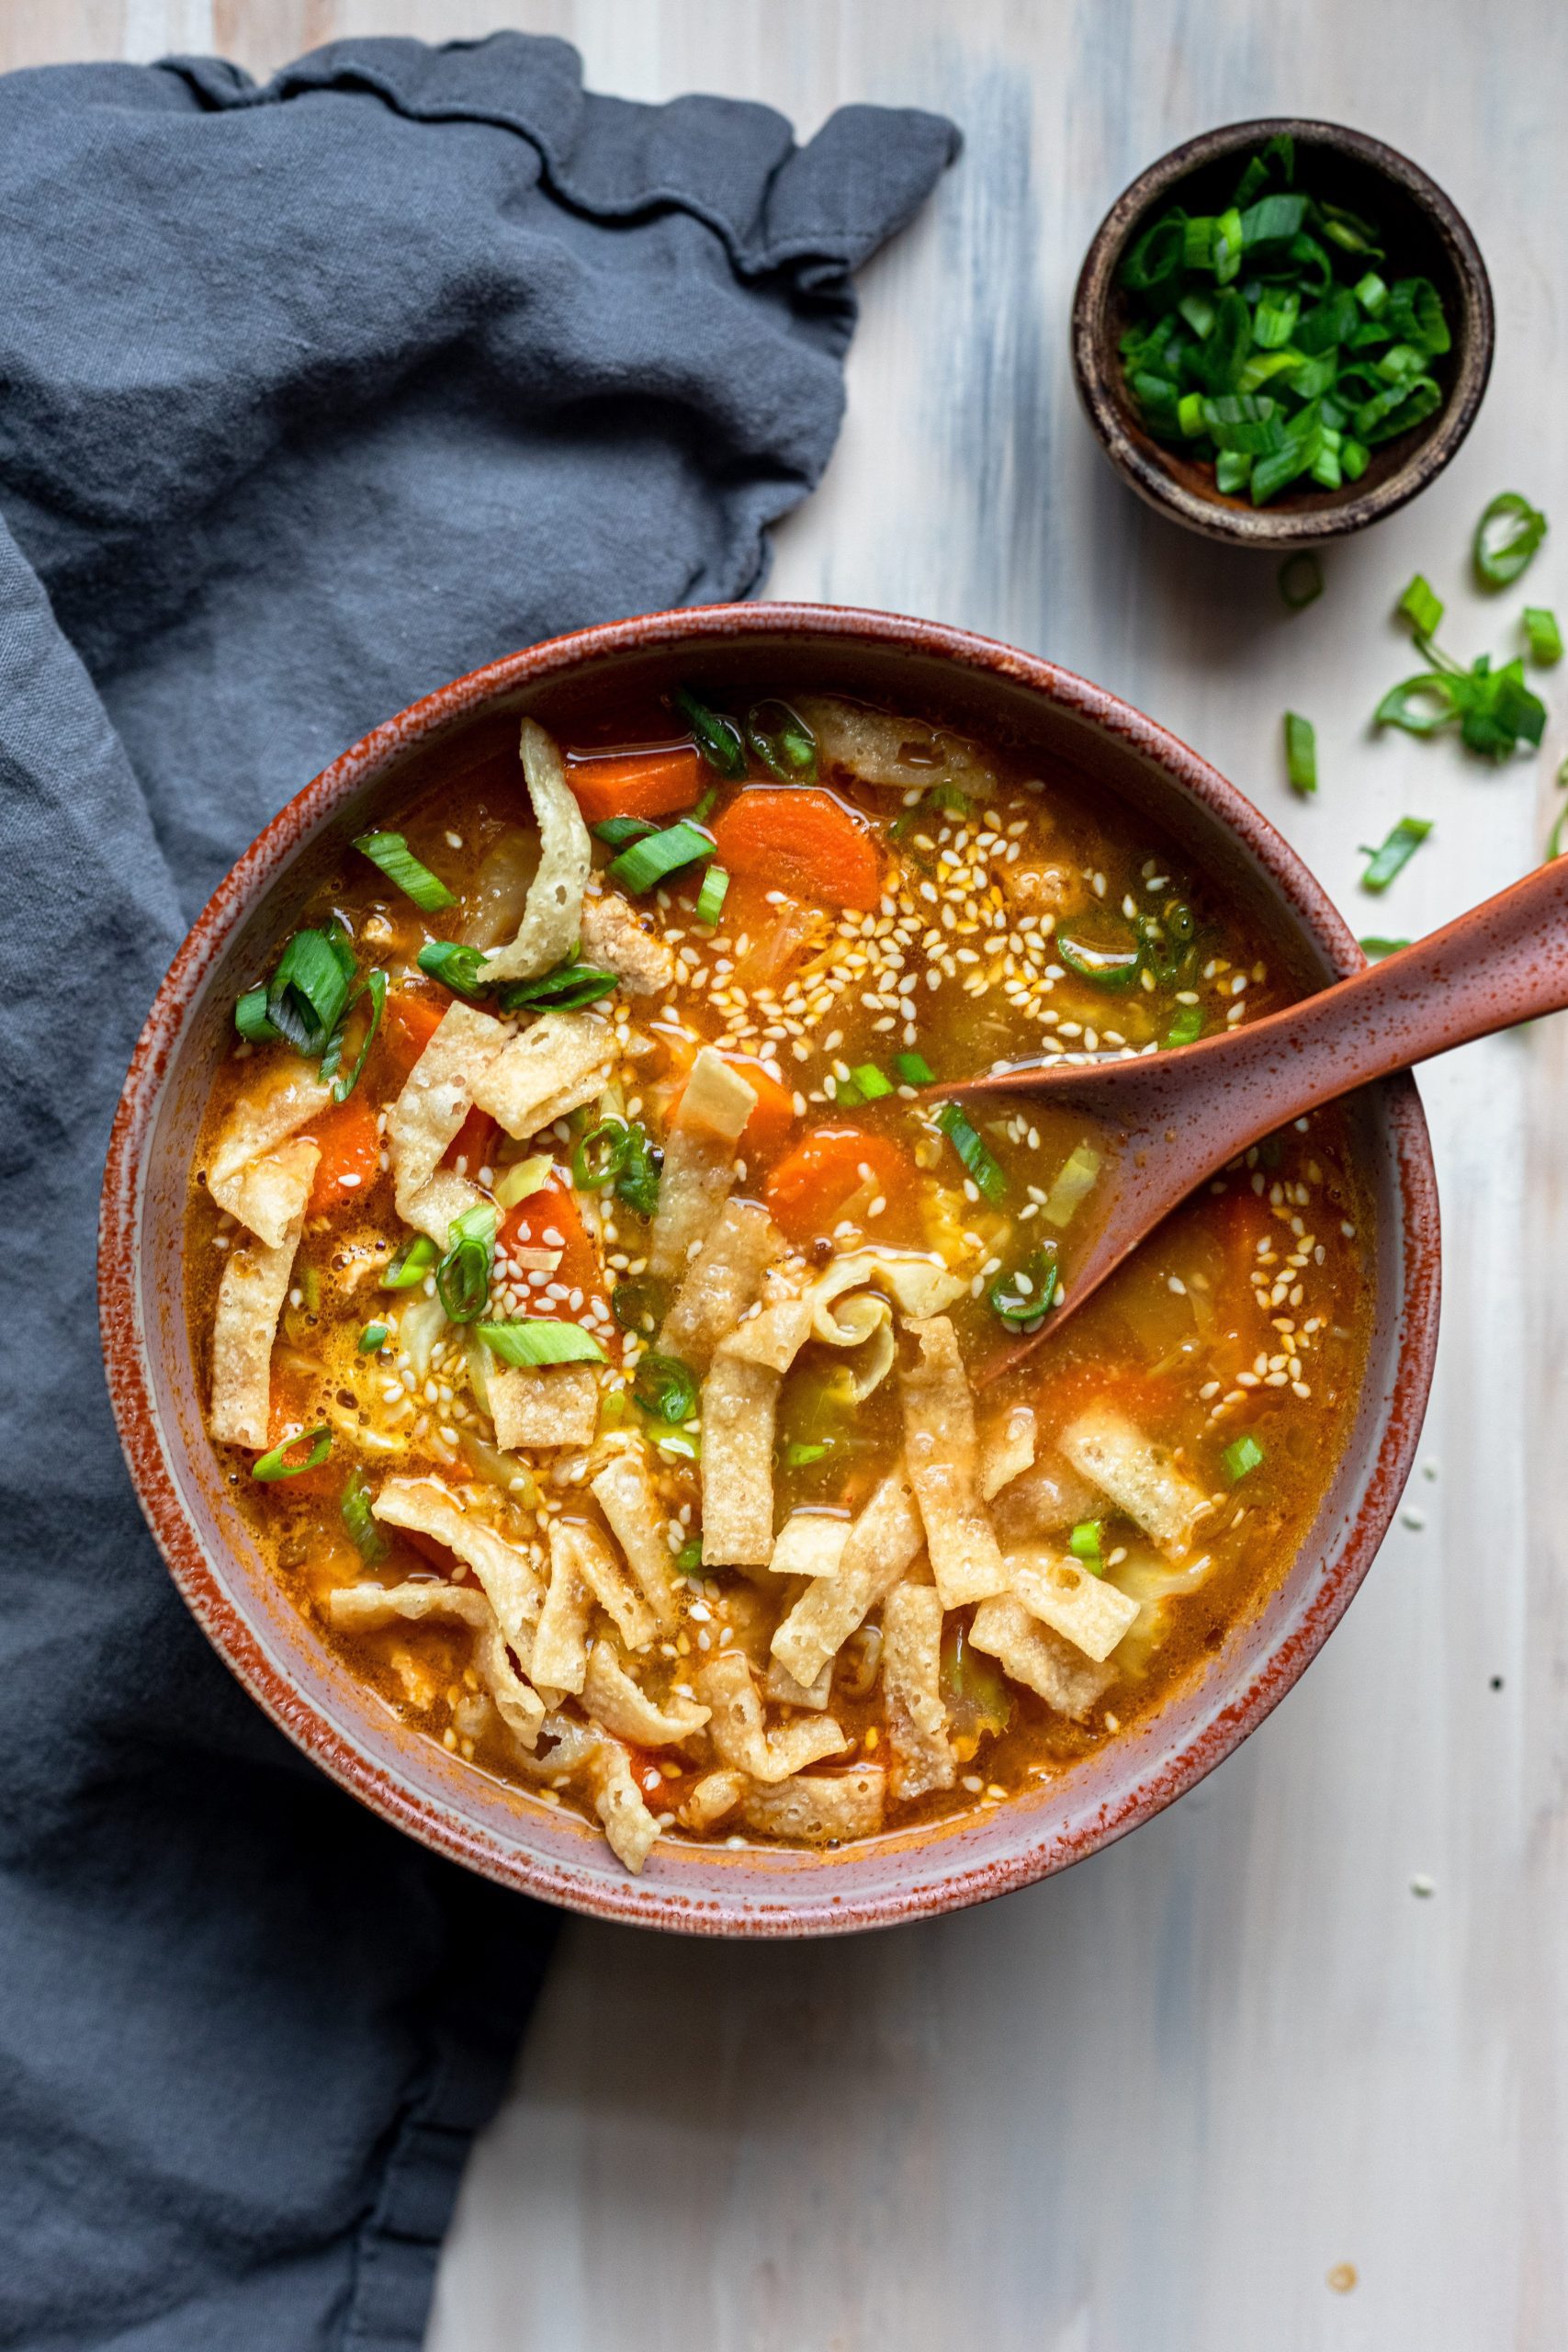 Healthy & Spicy Egg Roll Soup